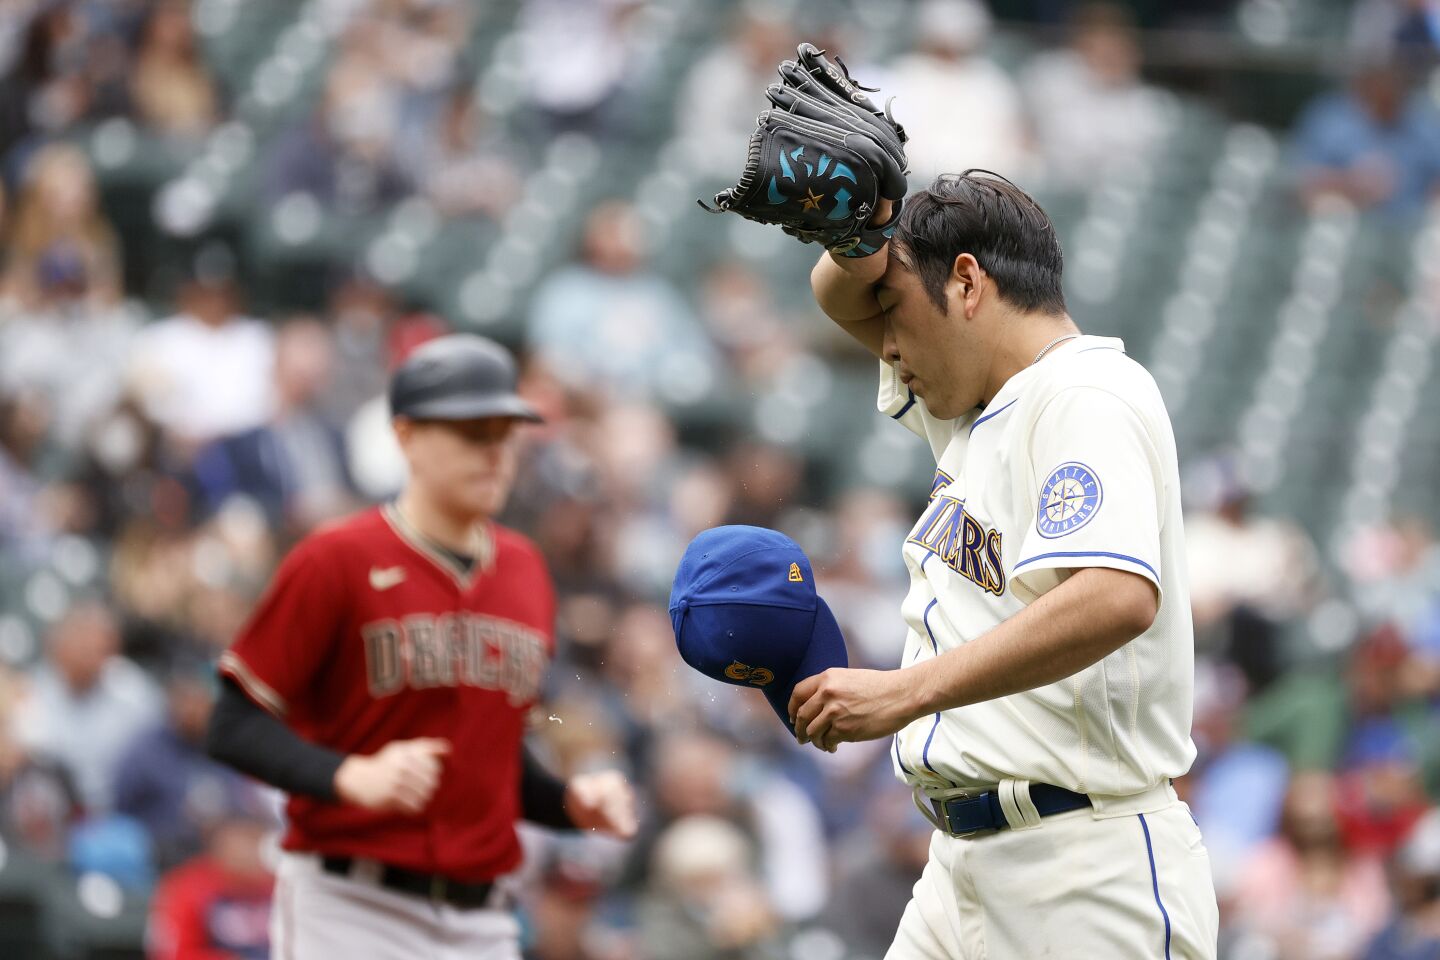 10 | Seattle Mariners (77-66; LW: 9)A series loss to lowly Arizona is a bucket of cold water on the Mariners’ playoff hopes, but they remain within striking distance at three games behind the Red Sox.